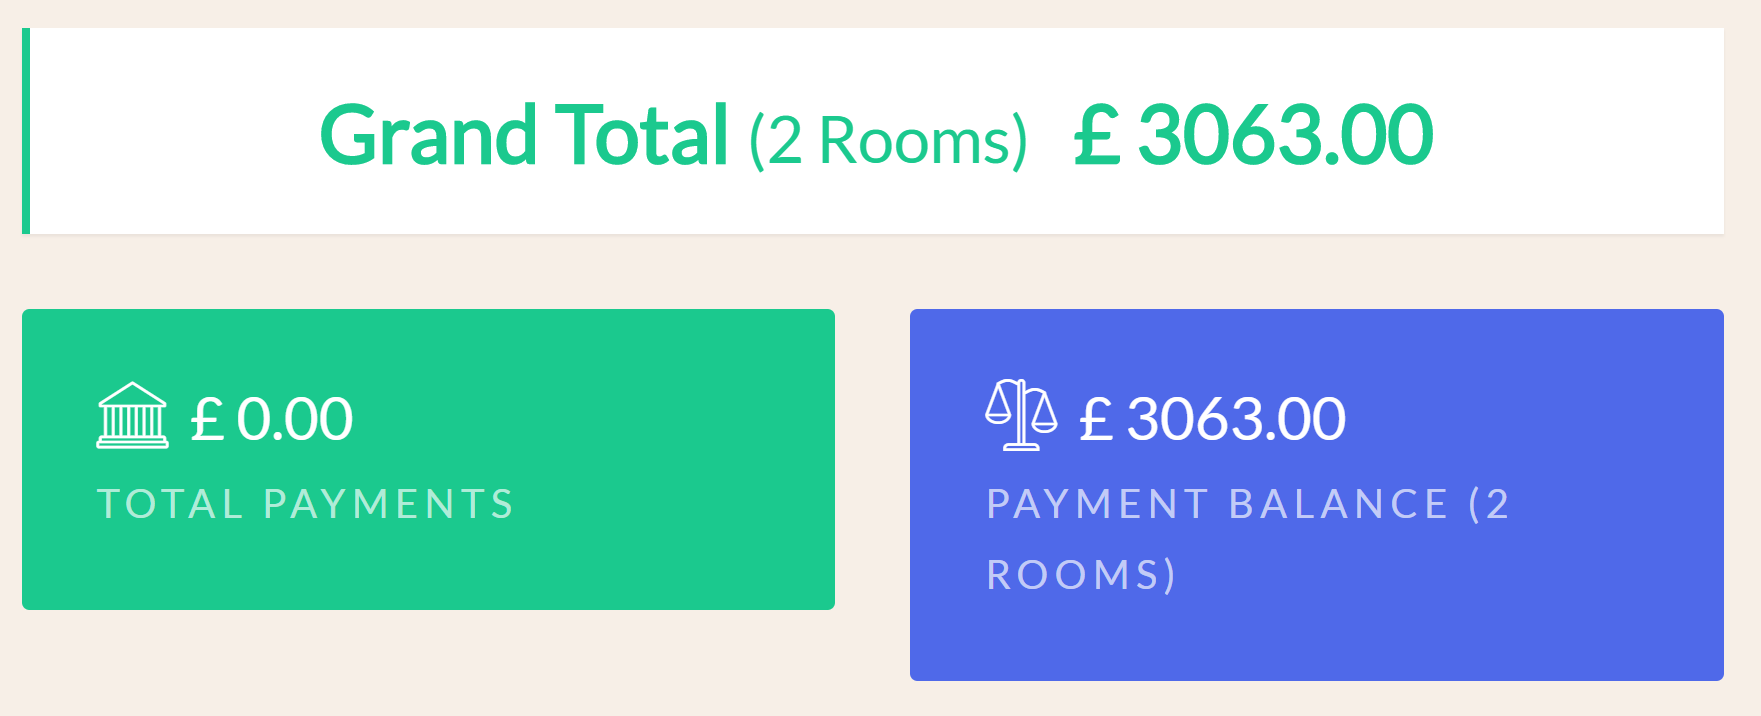 If you cancel the main room in the group, all the additional rooms will be cancelled as well. This way you can cancel the entire booking at once. Just note that the cancellation fee, if any, should take into account the ‘Grand Total’ for all the rooms in the group.